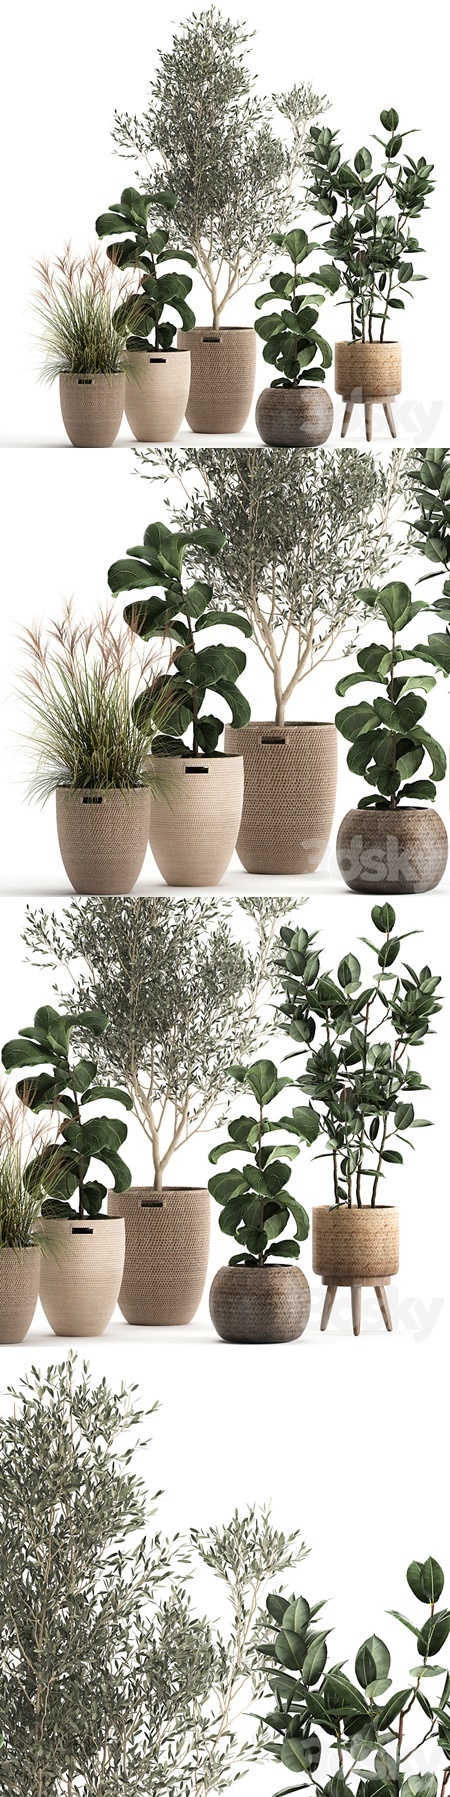 Plant collection 972. Olive, basket, rattan, tree, reed, flowerpot, eco design, Scandinavian style